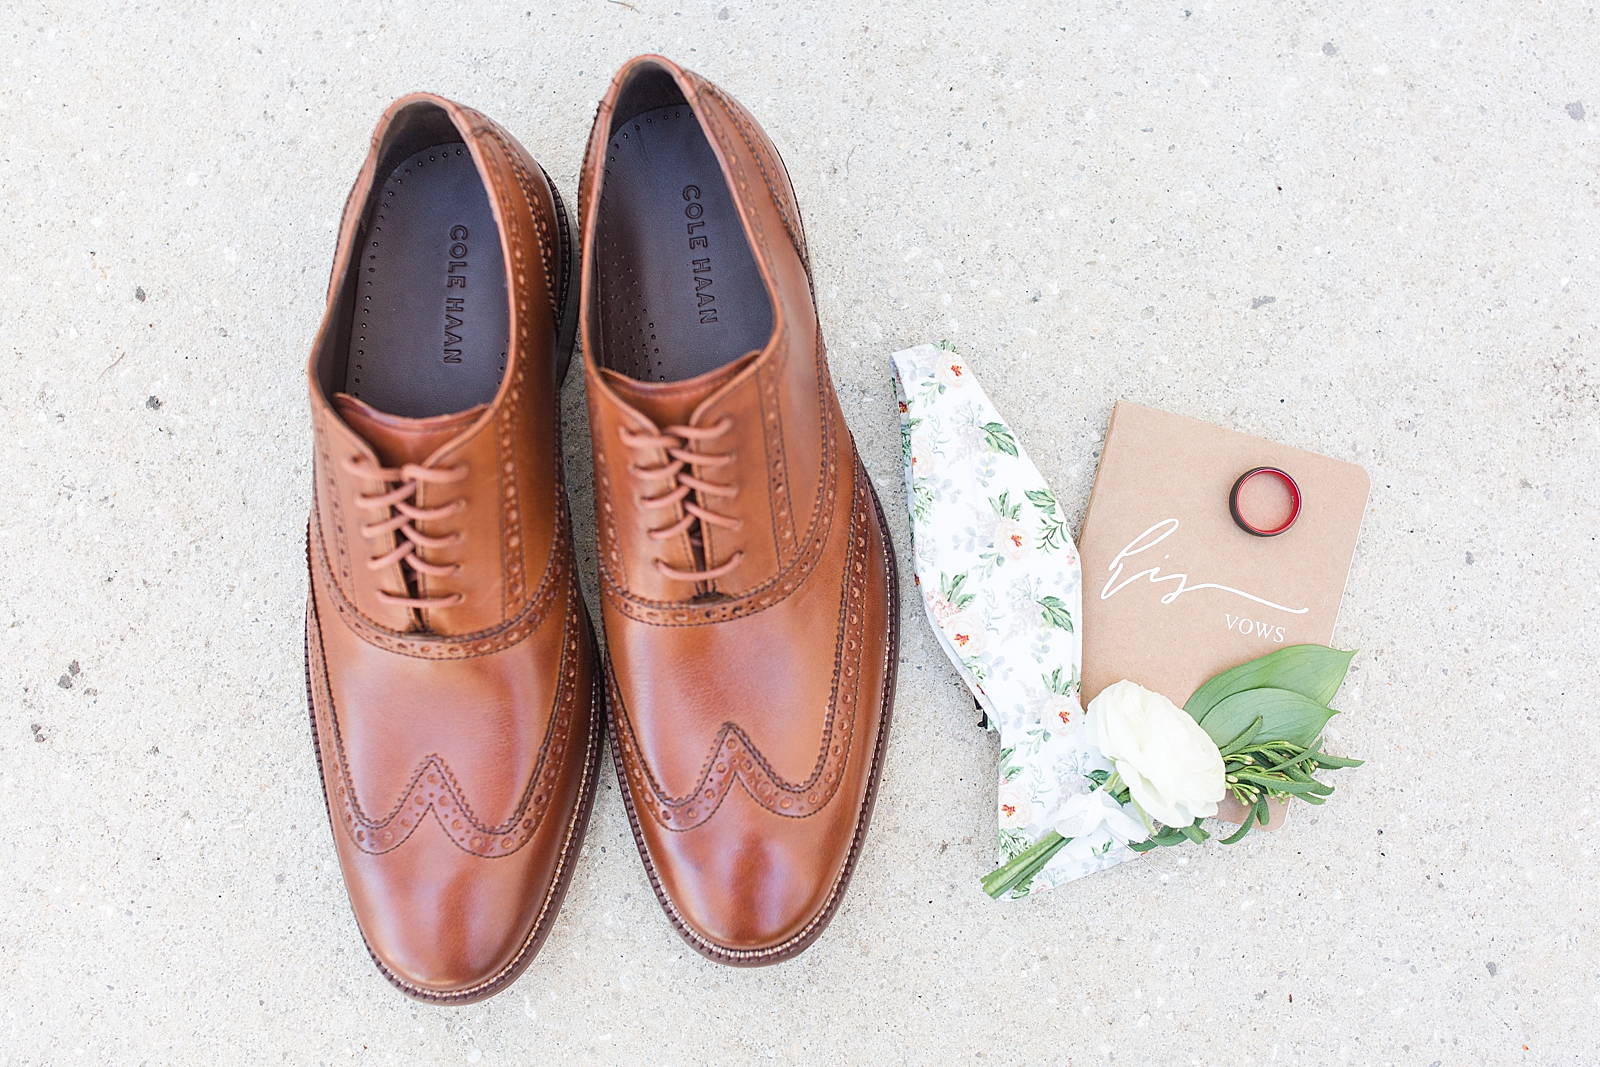 Enchanted Oaks Jacksonville Wedding Grooms Shoes Tie Ring and Boutonnière Photo